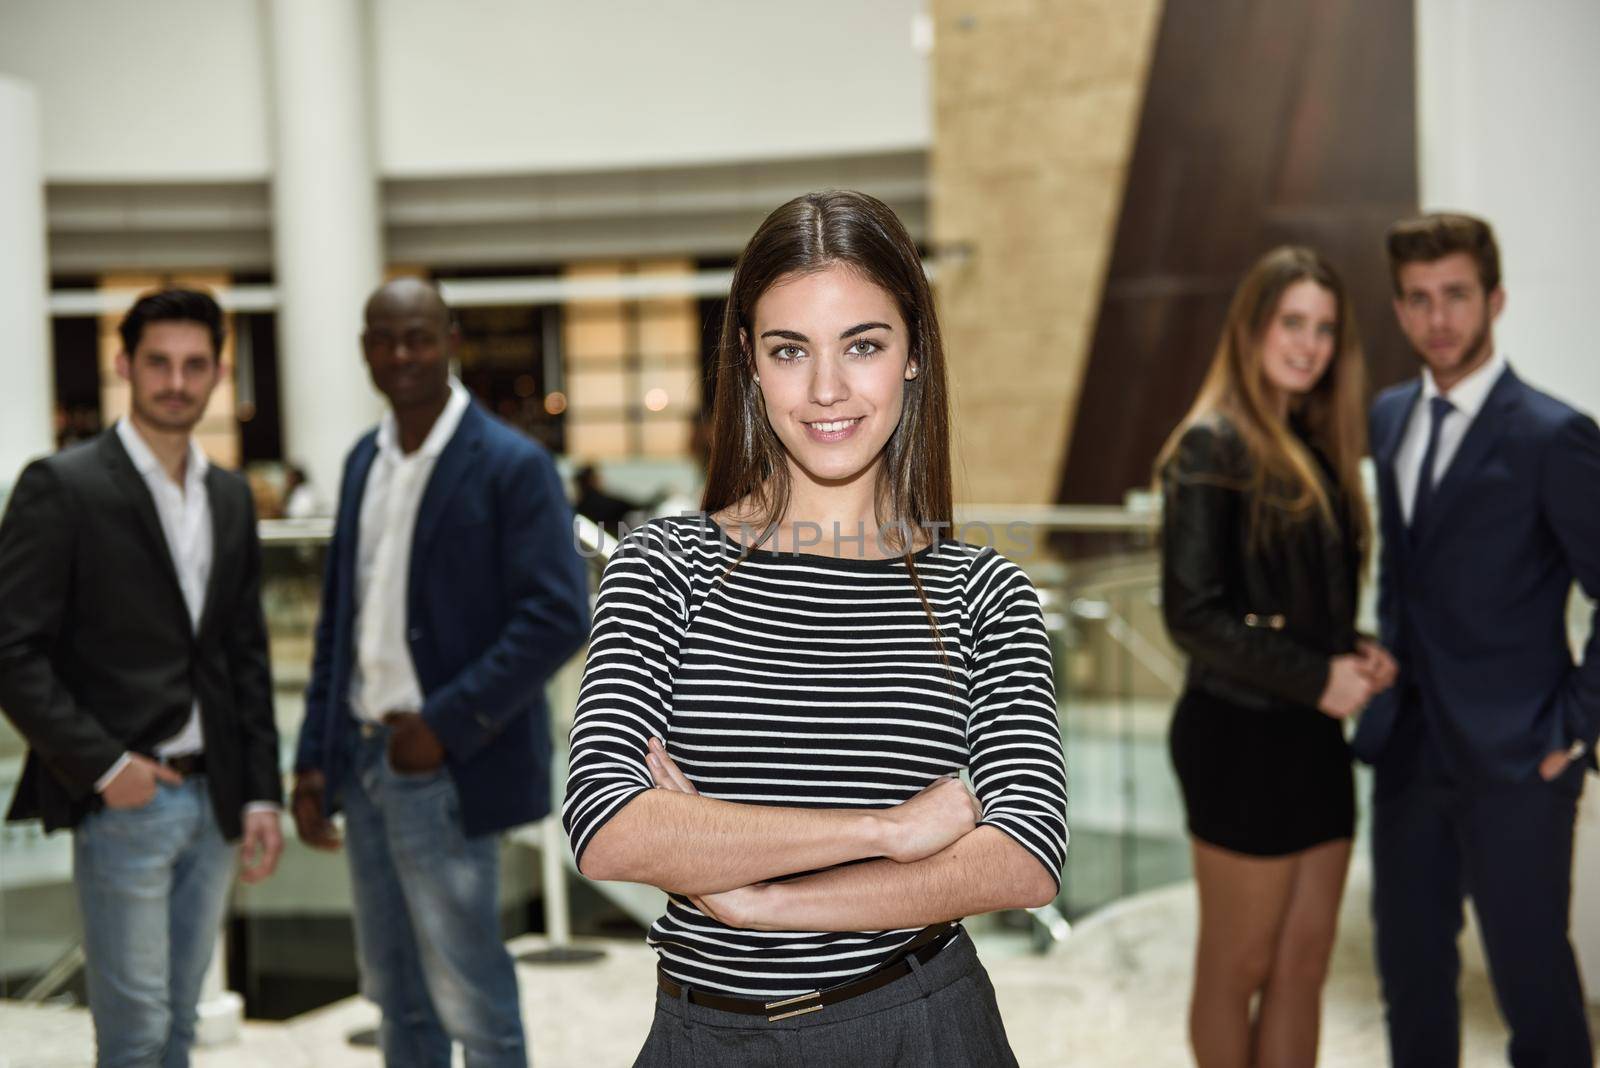 Young businesswoman leader looking at camera in office building. Group of multi-ethnic people in the background